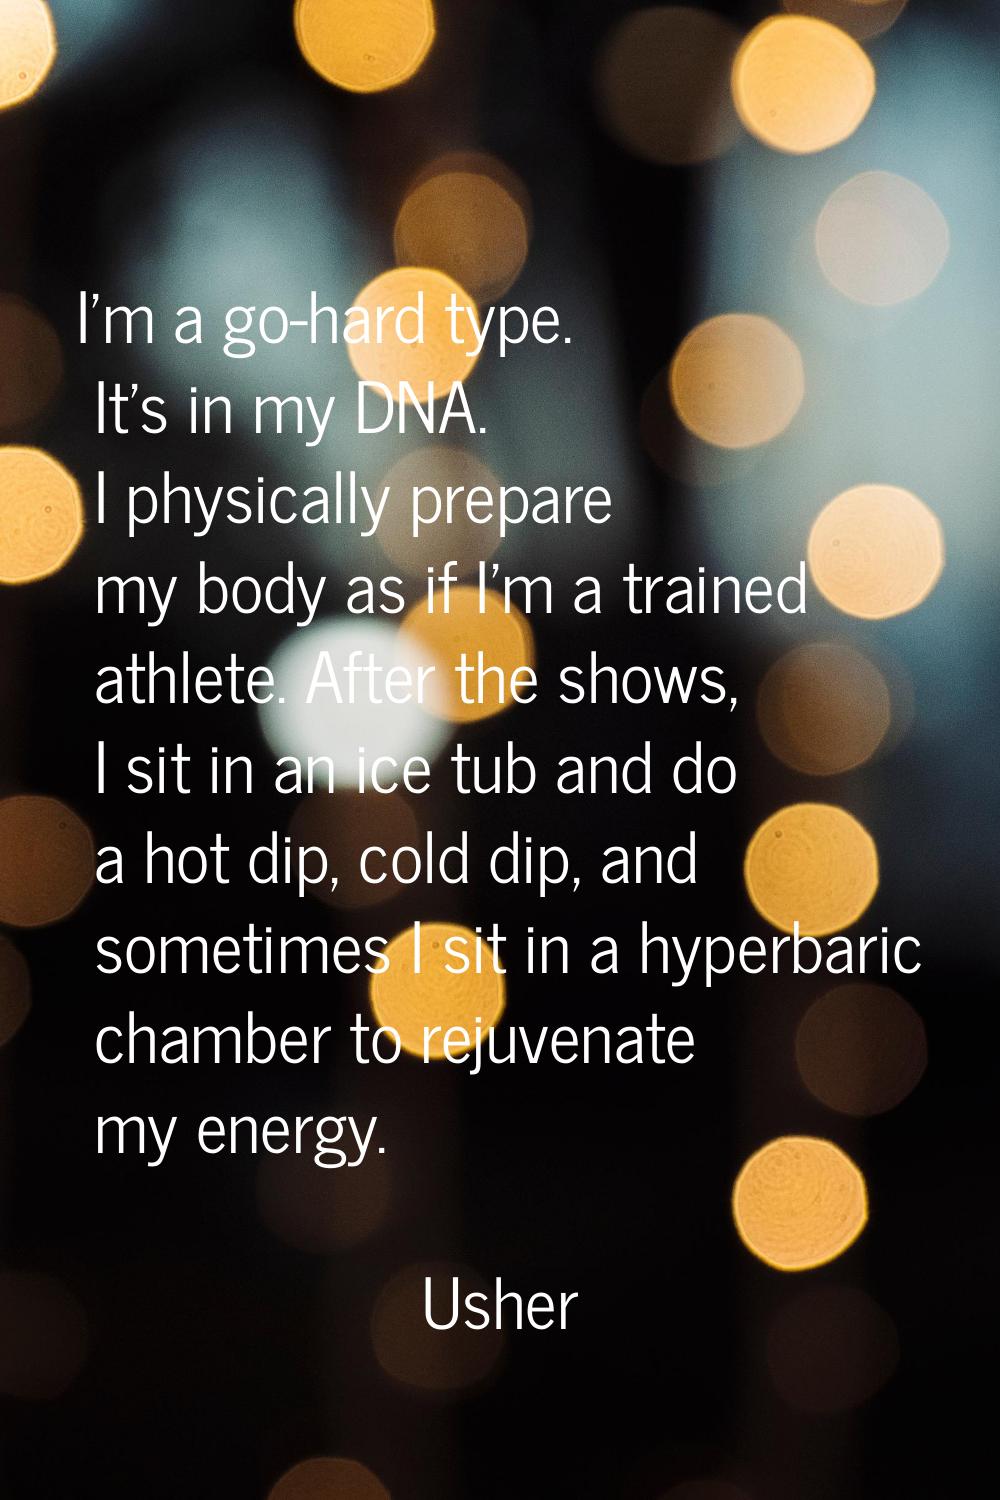 I'm a go-hard type. It's in my DNA. I physically prepare my body as if I'm a trained athlete. After